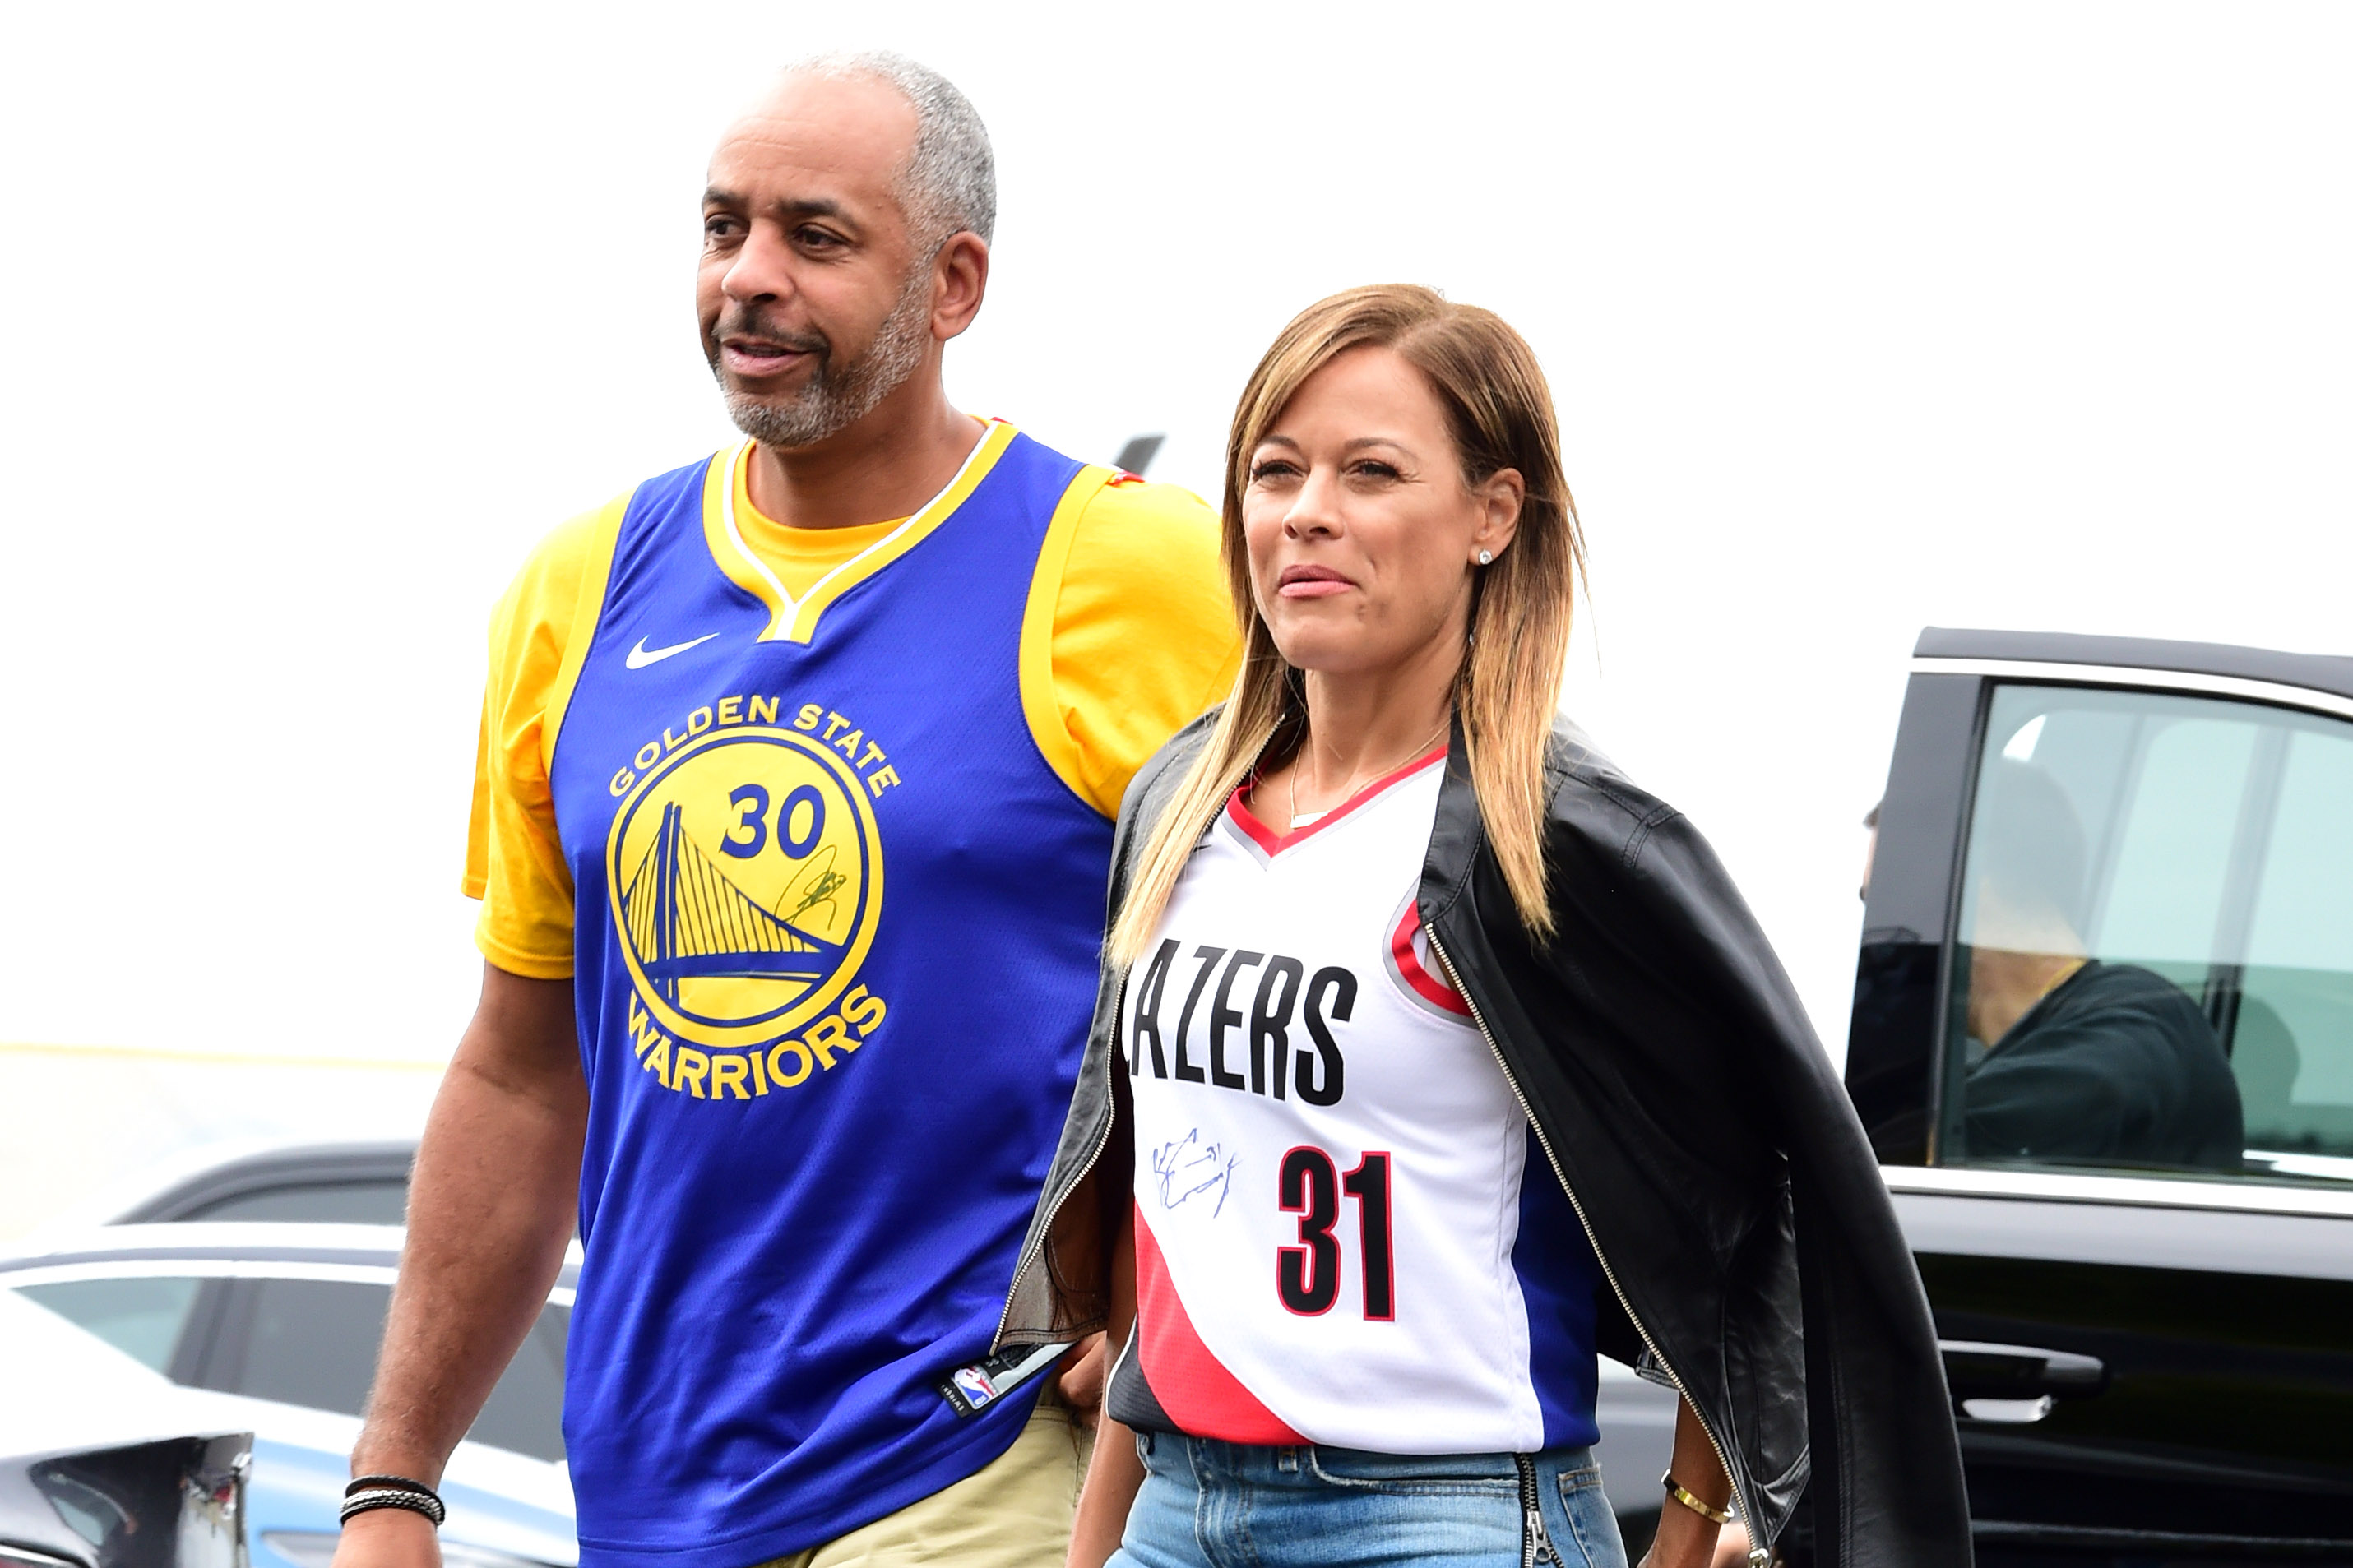 Step mom! After divorcing Stephen Curry's mother, the Warriors star's father has remarried